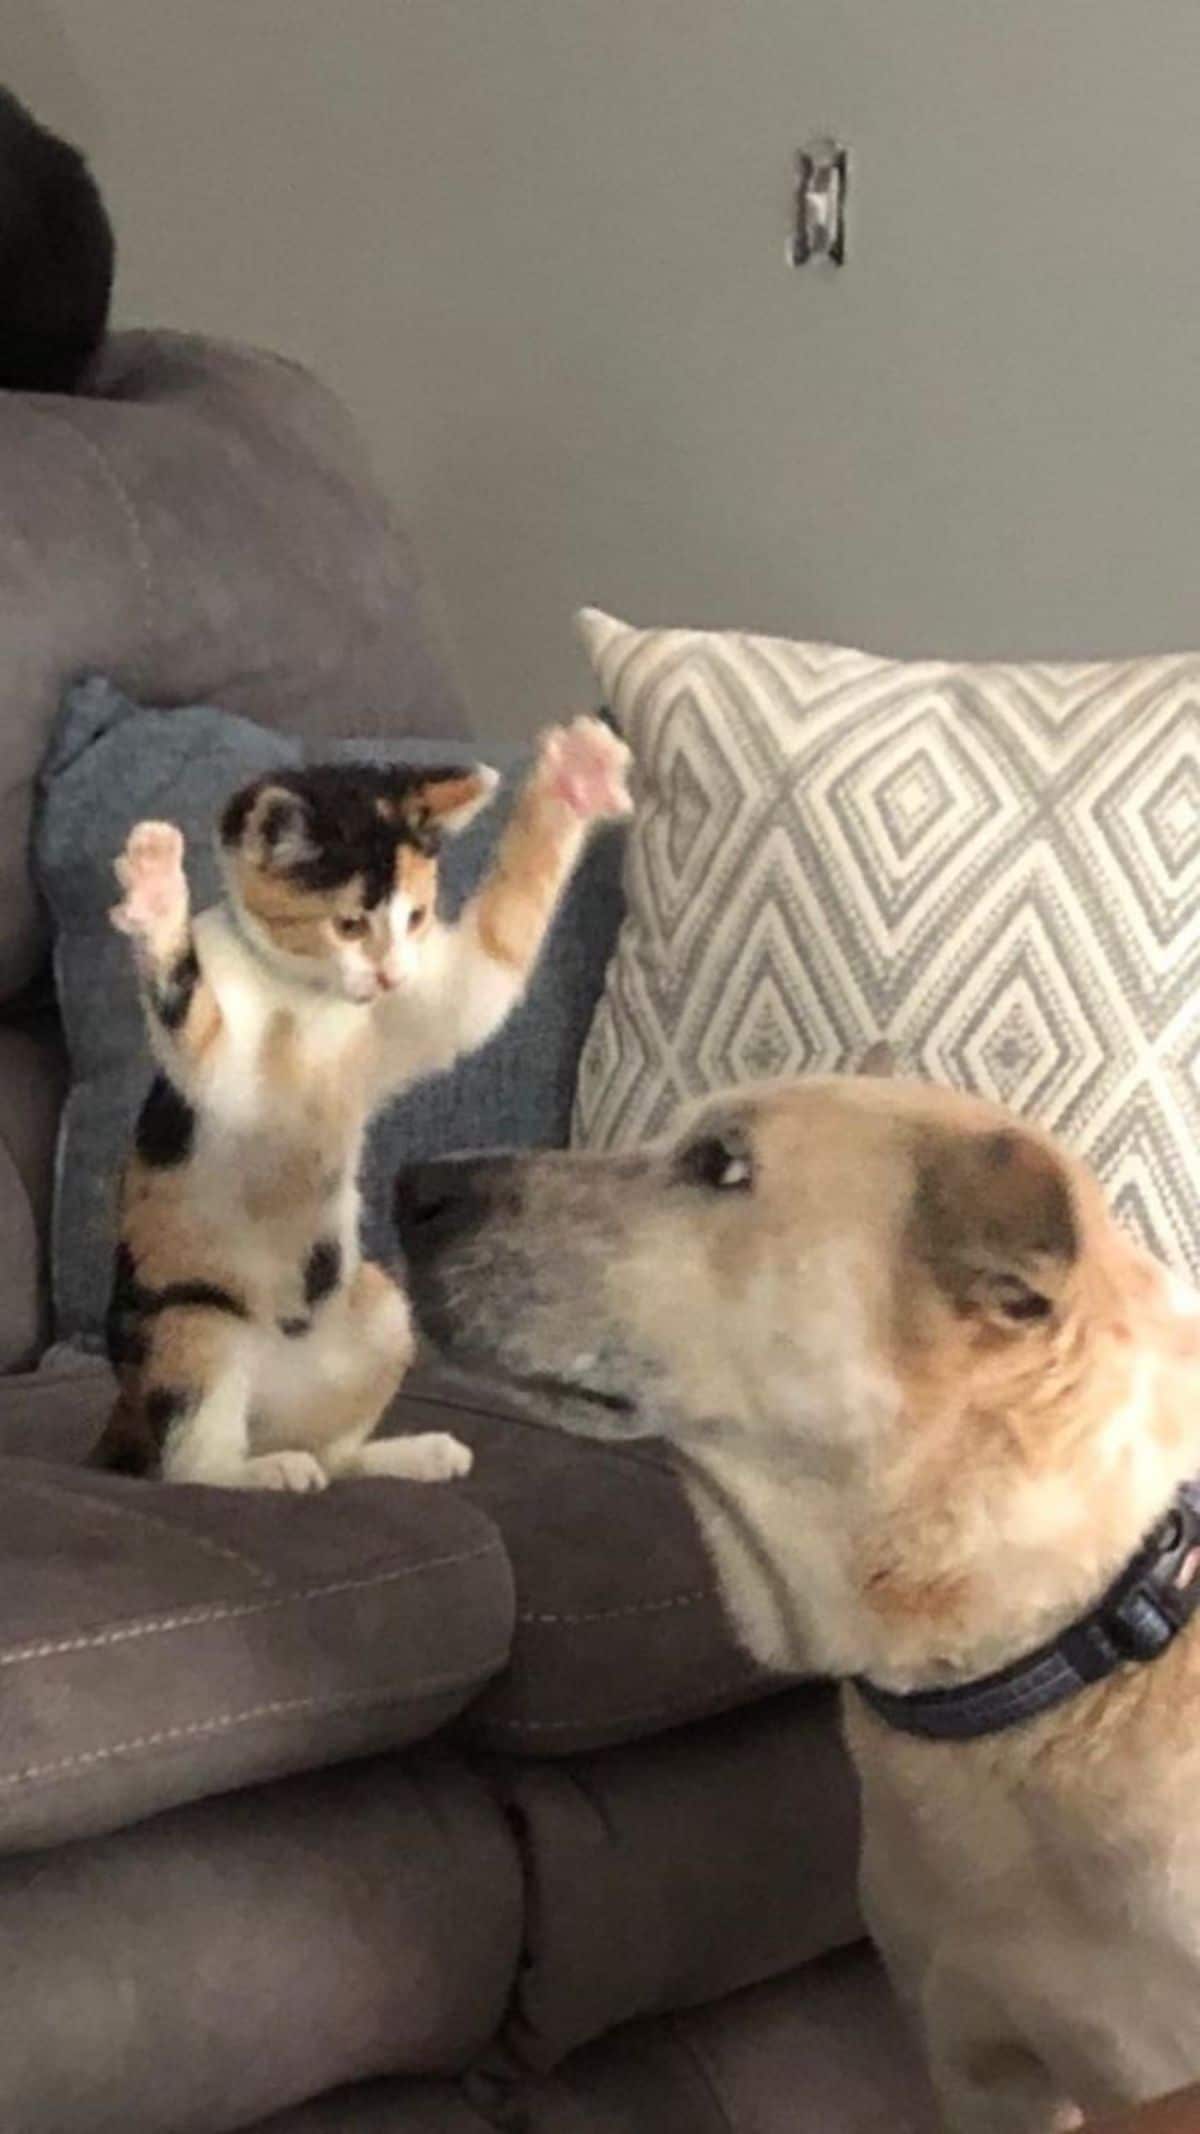 white orange and black kitten getting ready to jump at a brown dog